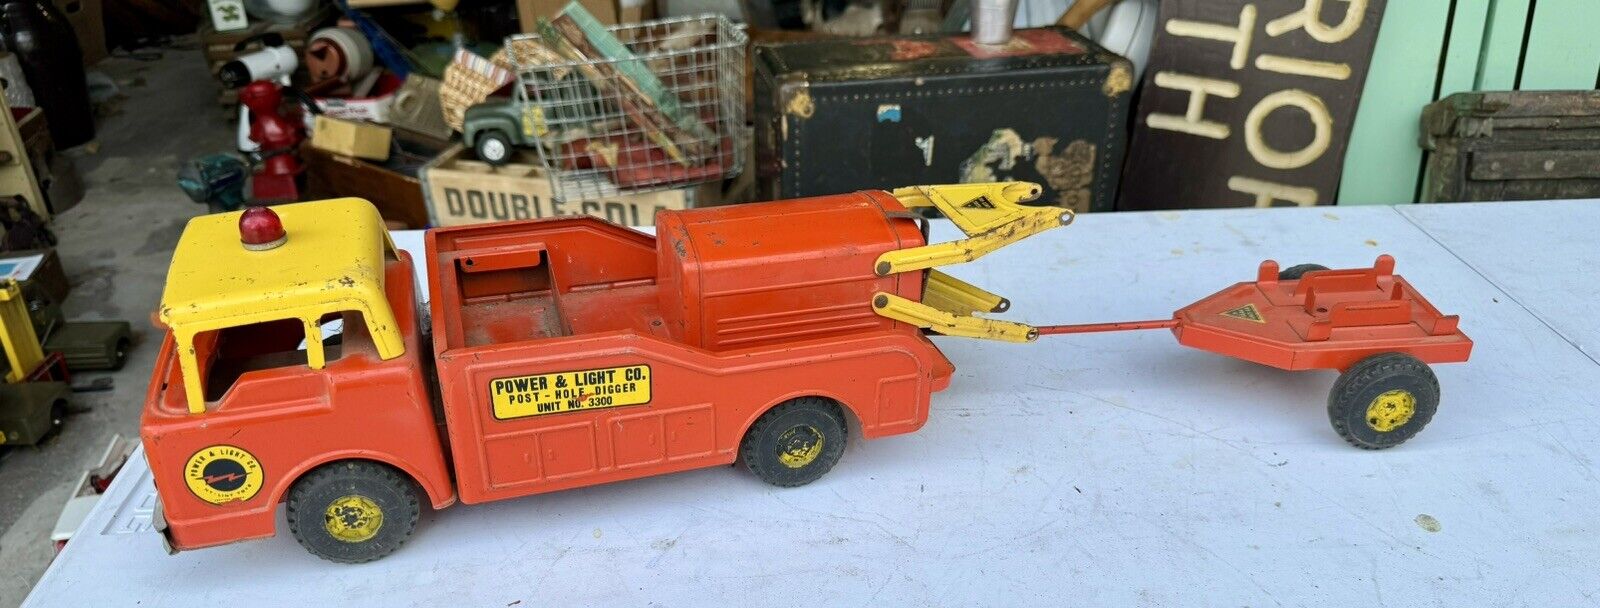 EARLY NYLINT  TOYS POWER & LIGHT CO POST HOLE DIGGER TRUCK NO. 3300 With Trailer